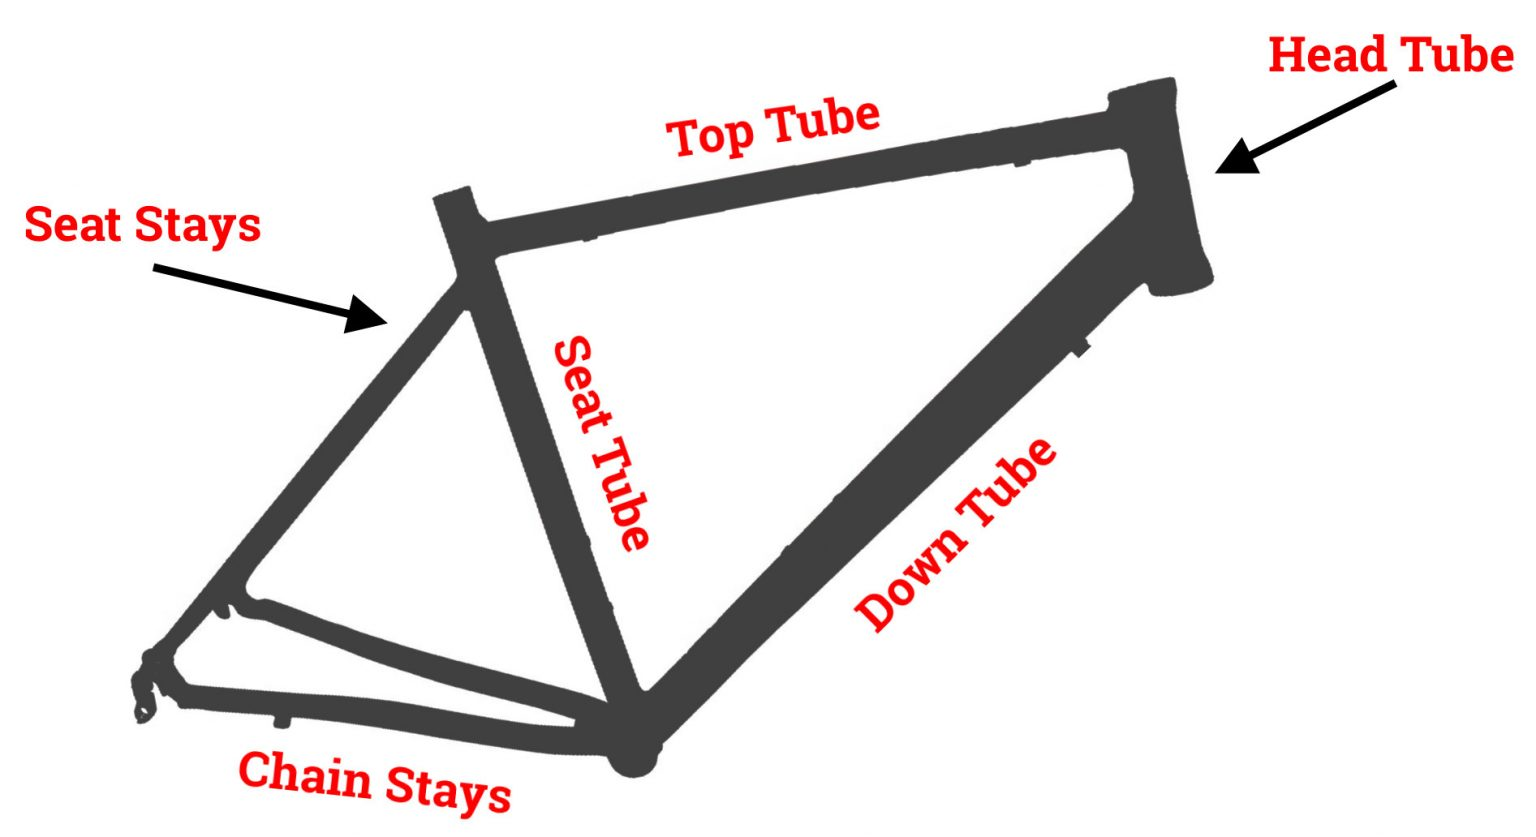 Calculate the top tube length using a tape measure.